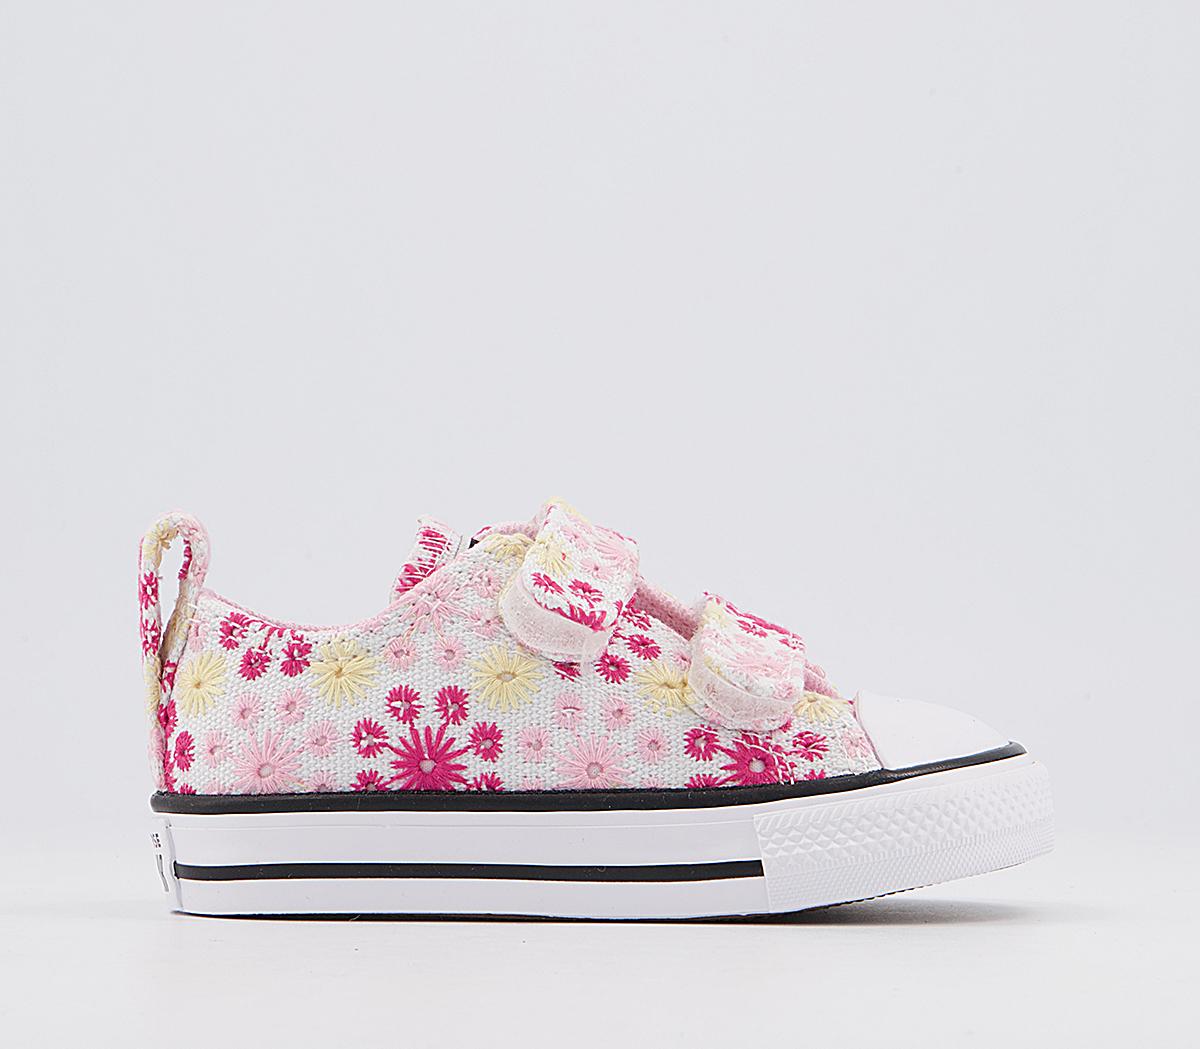 ConverseAll Star 2vlace TrainersWhite Pink Black Broderie